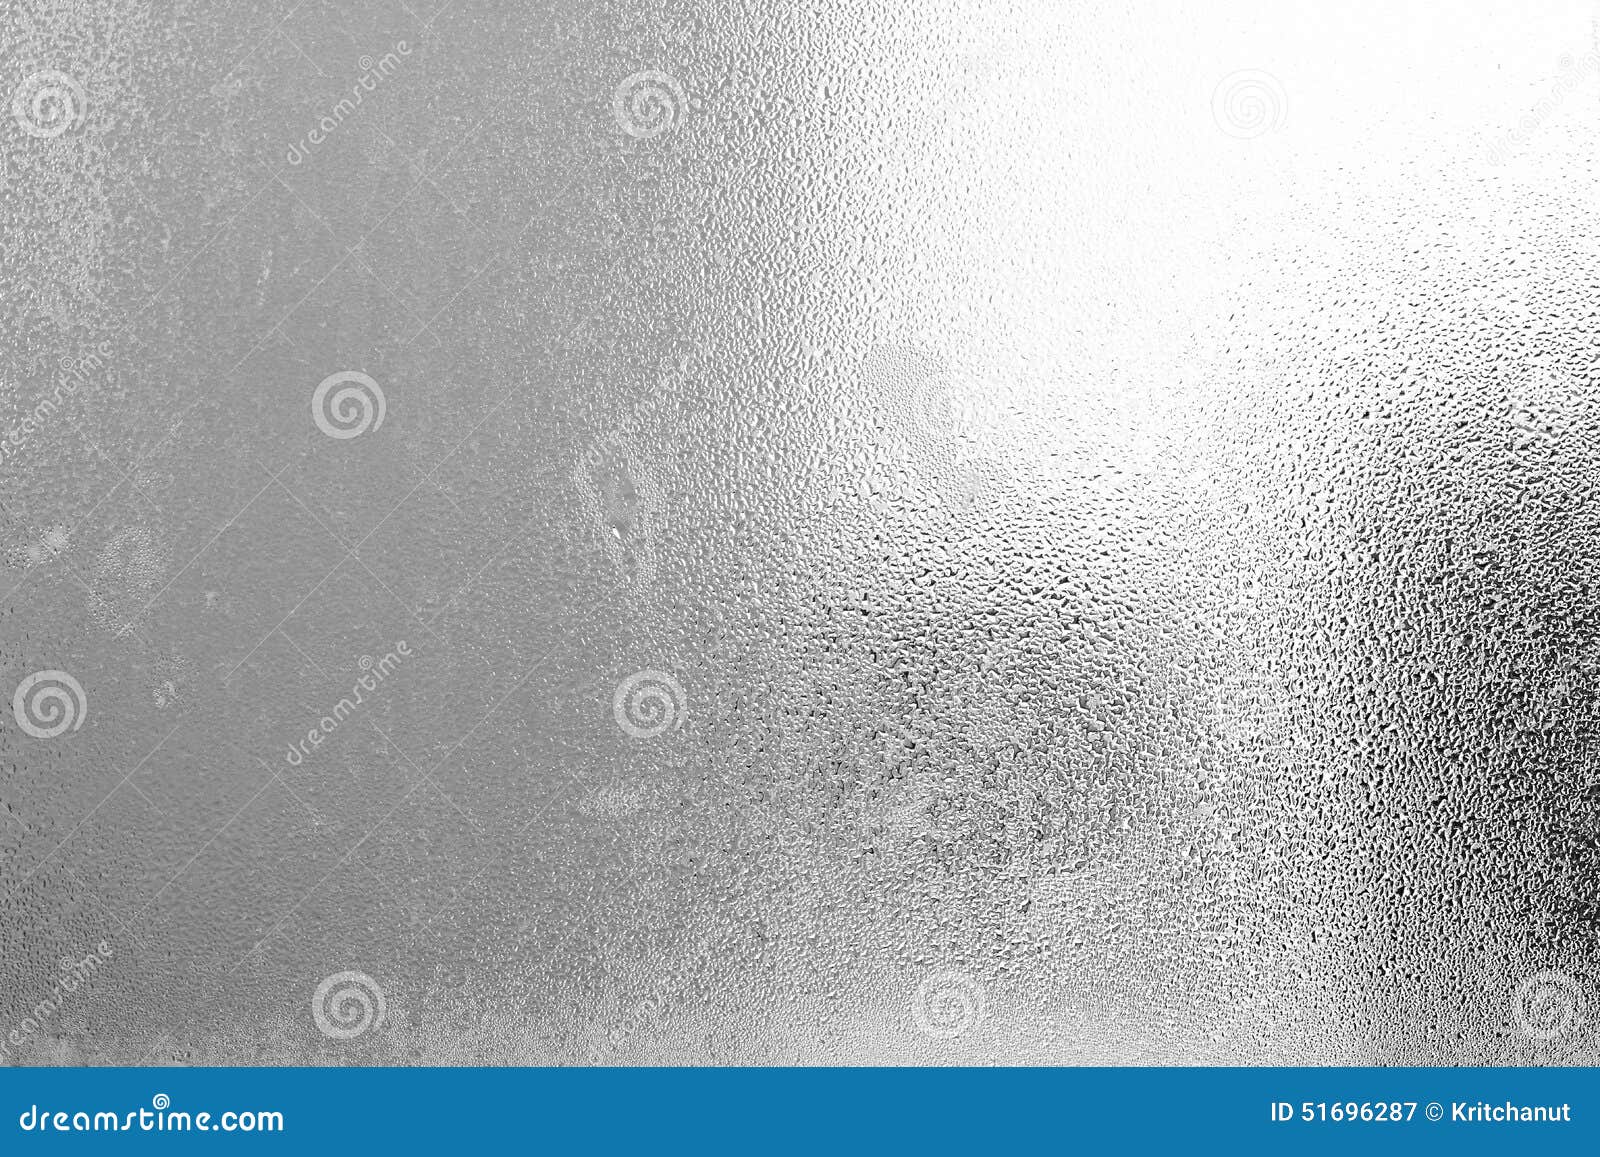 frosted glass texture with water drops & steam